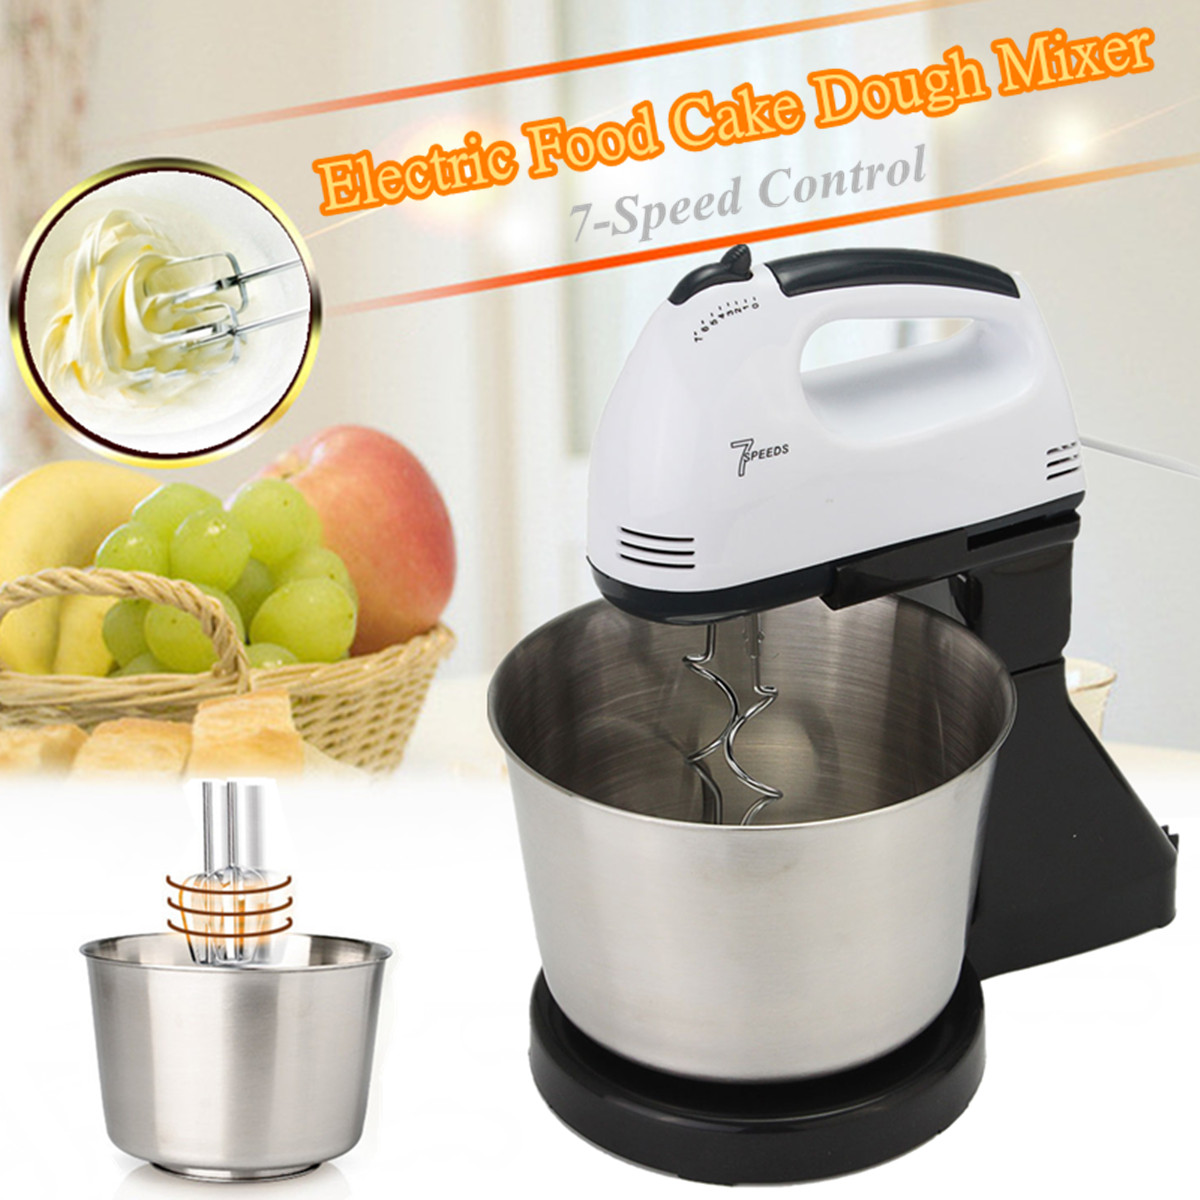 7 Speed Electric Egg Beater Dough Cakes Bread Egg Stand Mixer + Hand Blender + Bowl Food Mixer Kitchen Accessories Egg Tools 14